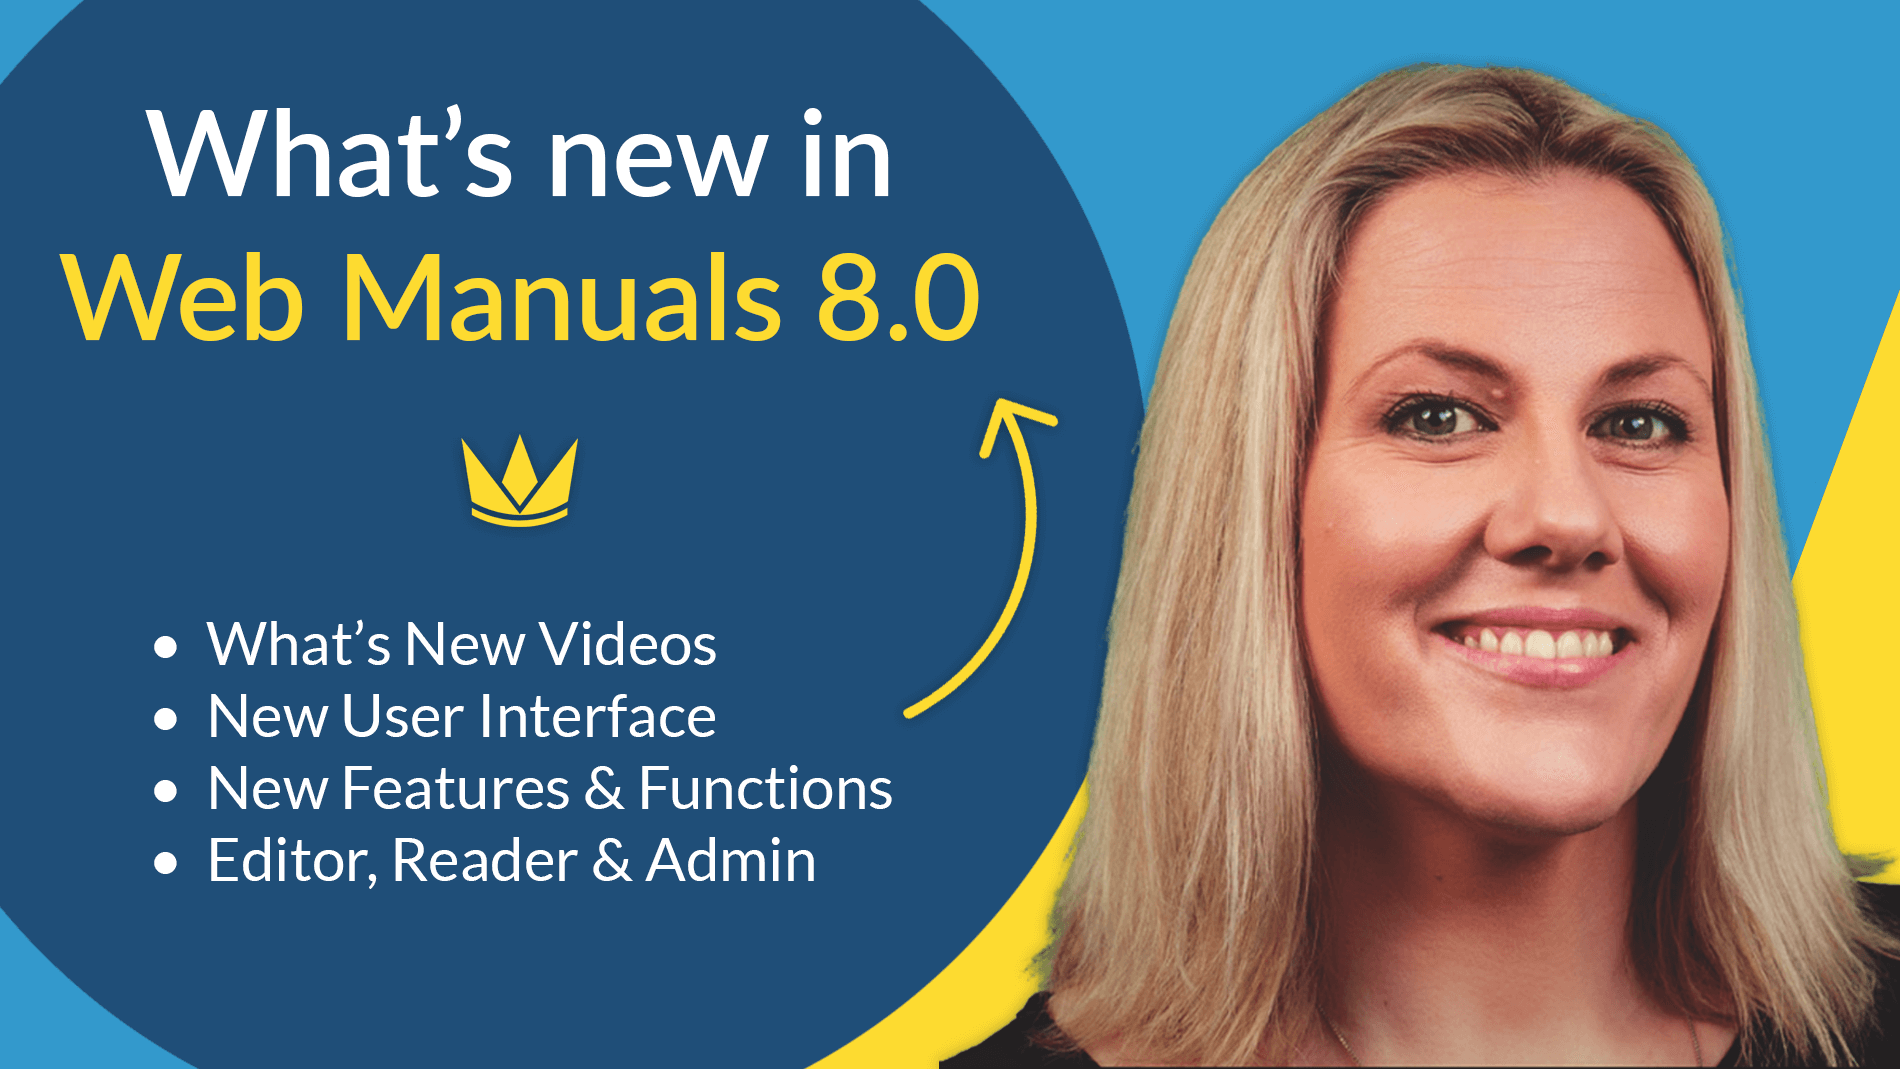 whats new in webmanuals 8.0 with jody bight videos differences between 7 and 8